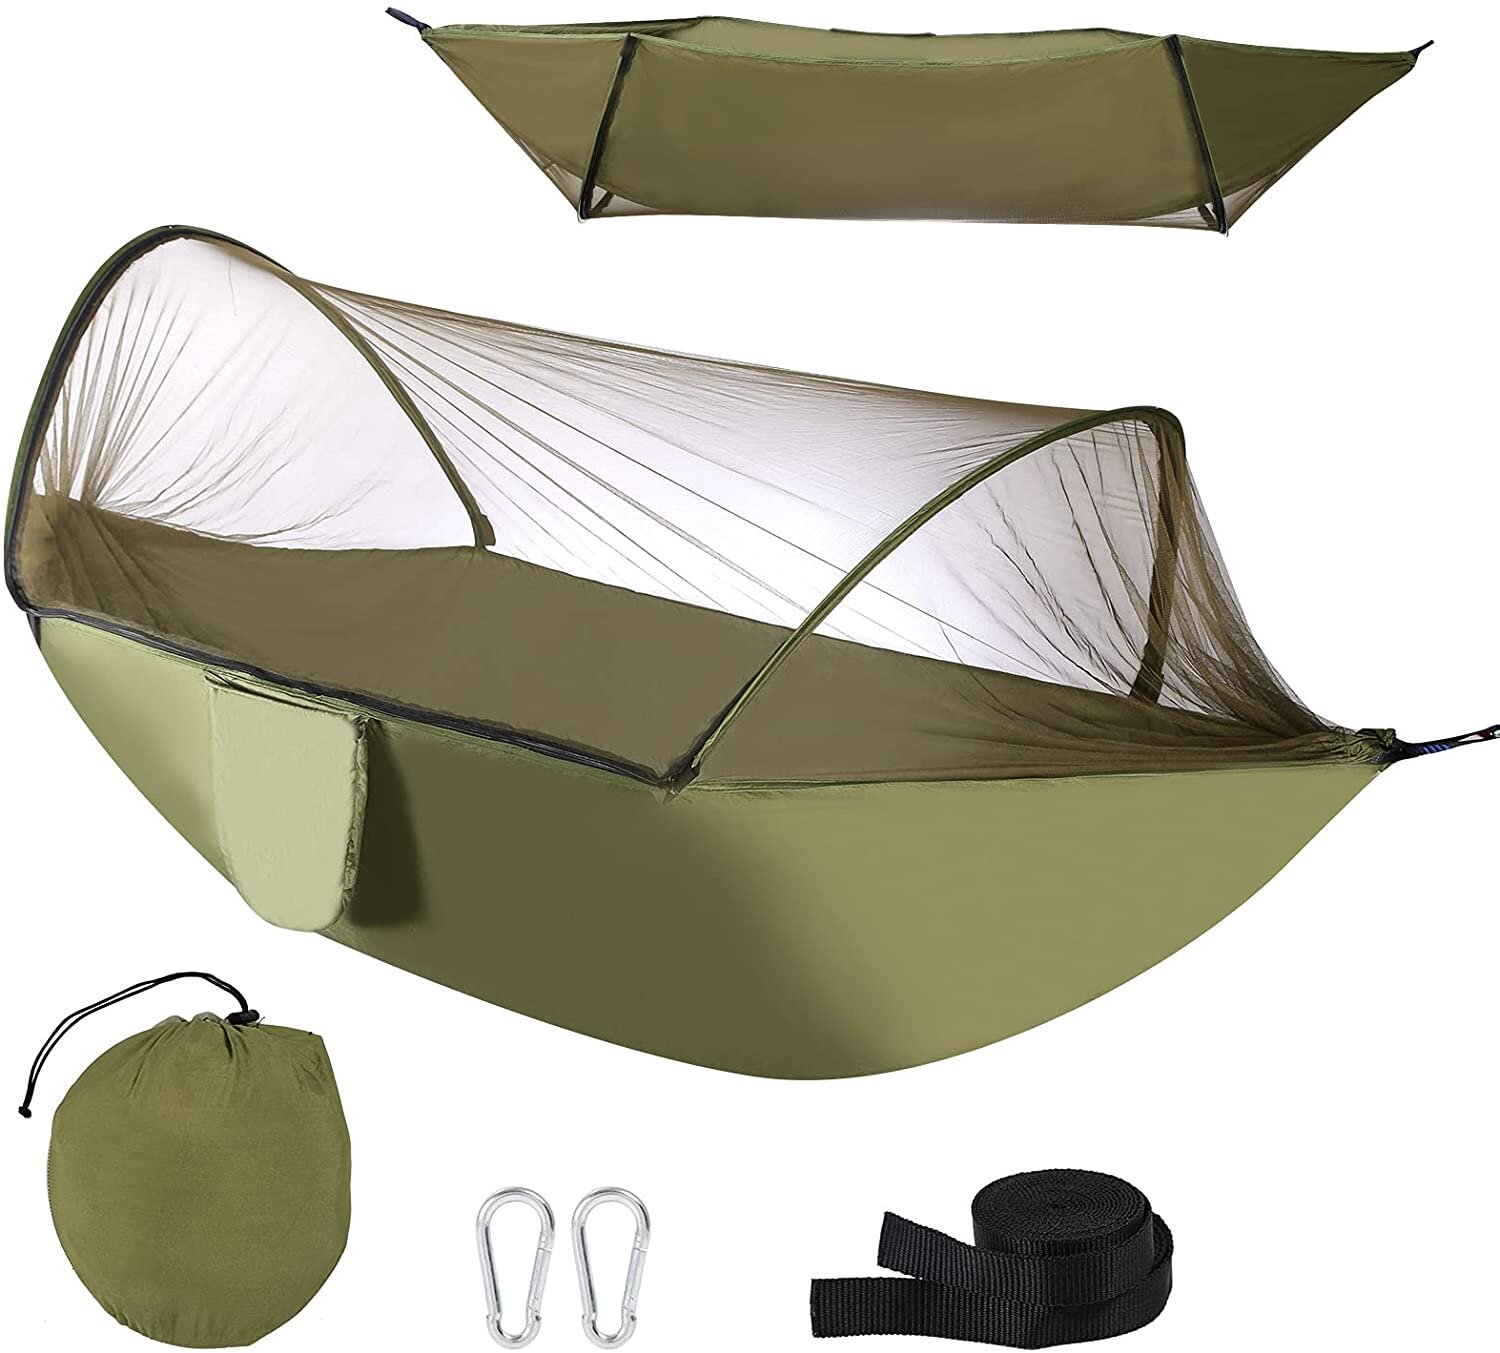 Tree Straps Backpacking Rain Fly Complete Package with Mosquito Bug Net and Travel Great for Hiking Oak Creek Camping Hammock and Accessories Weighs Only 4 Pounds. 